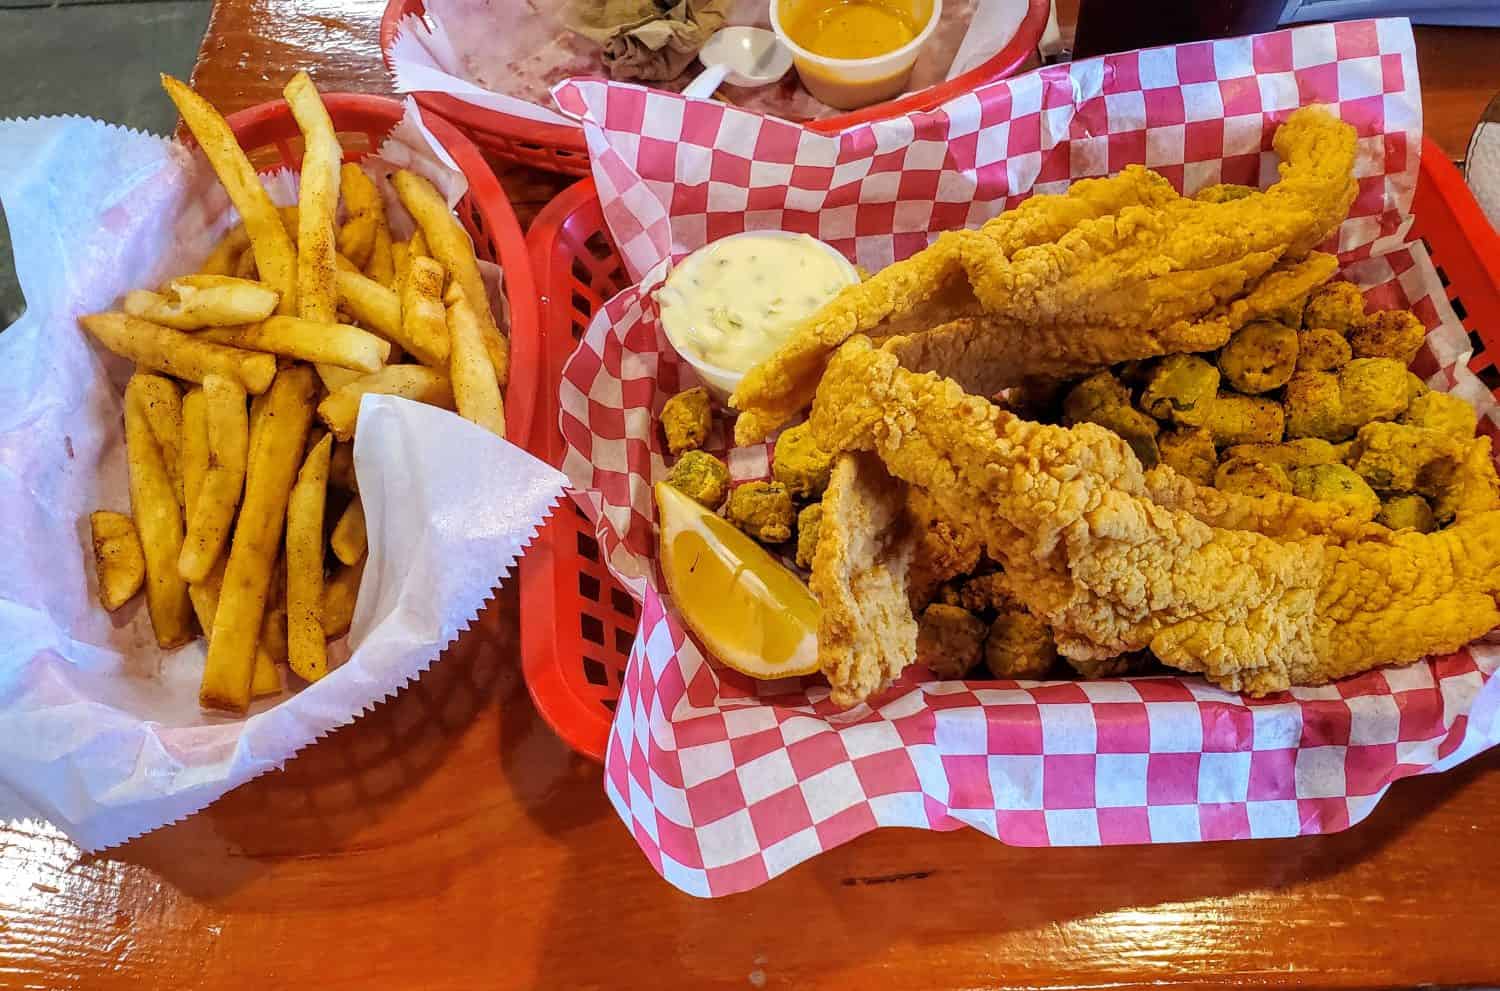 Fried Catfish basket with French fries and fried okra